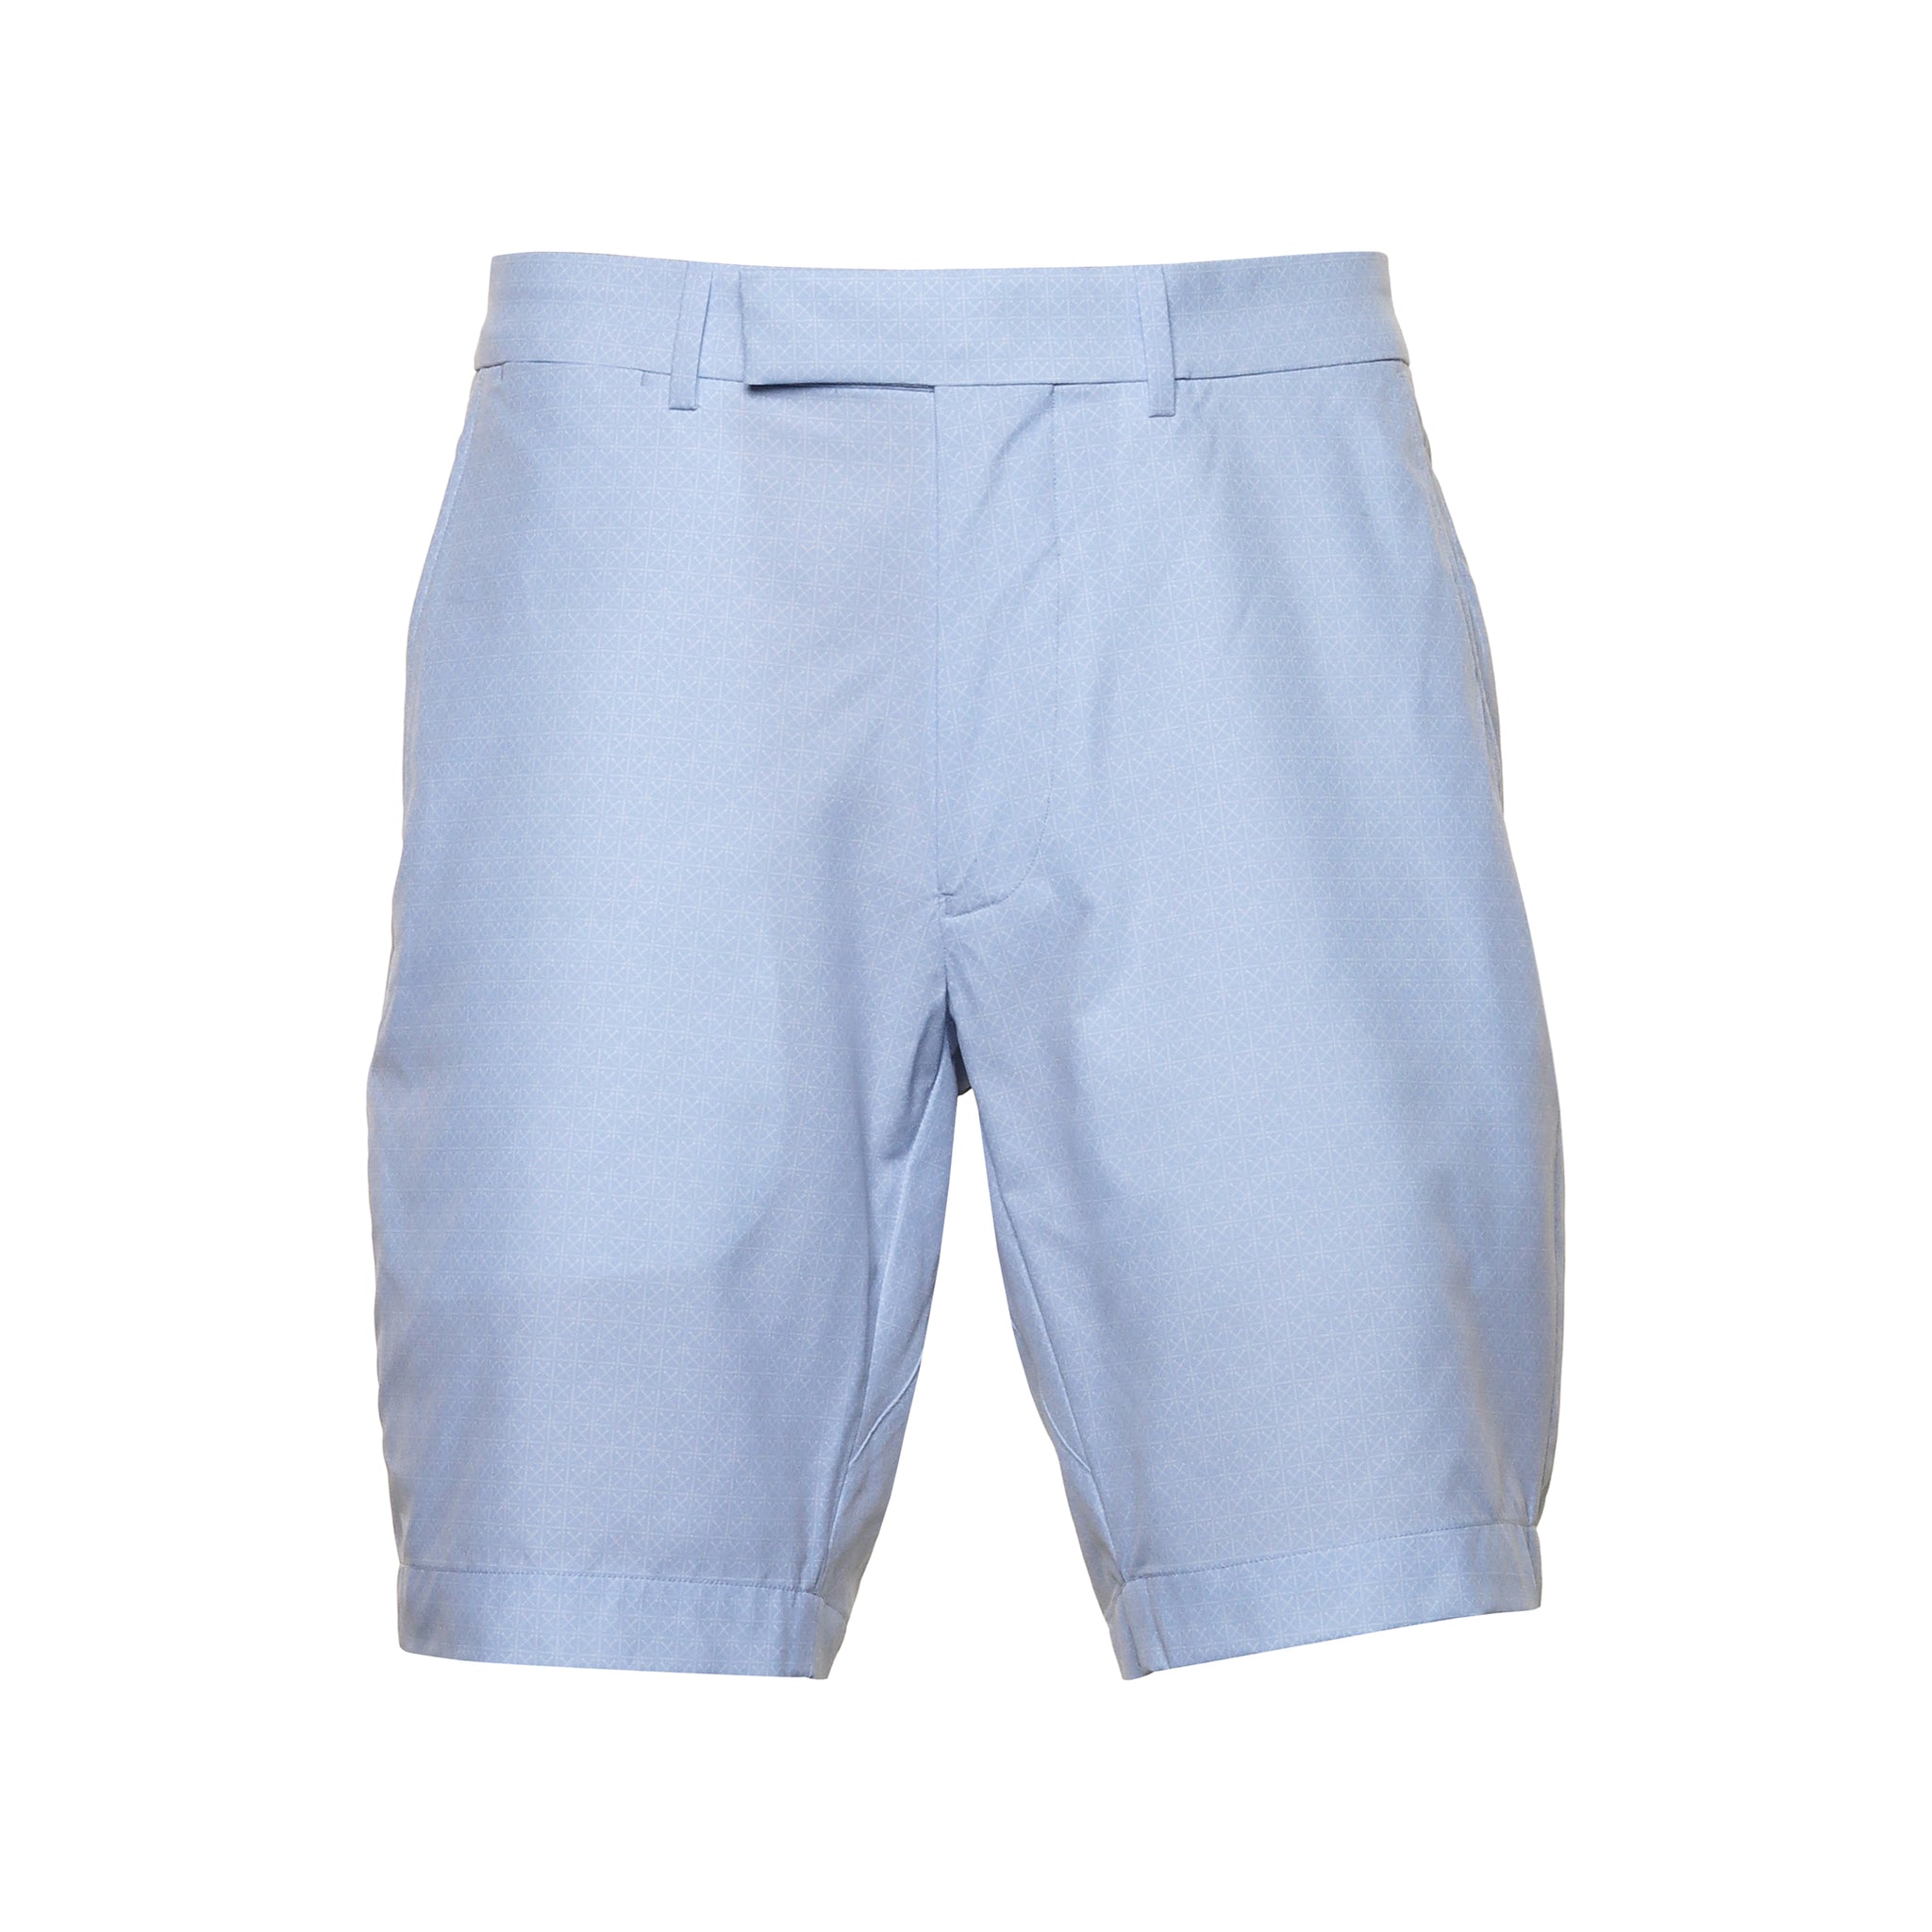 rlx-ralph-lauren-stretch-tailored-fit-shorts-785934327-office-blue-tee-tile-001